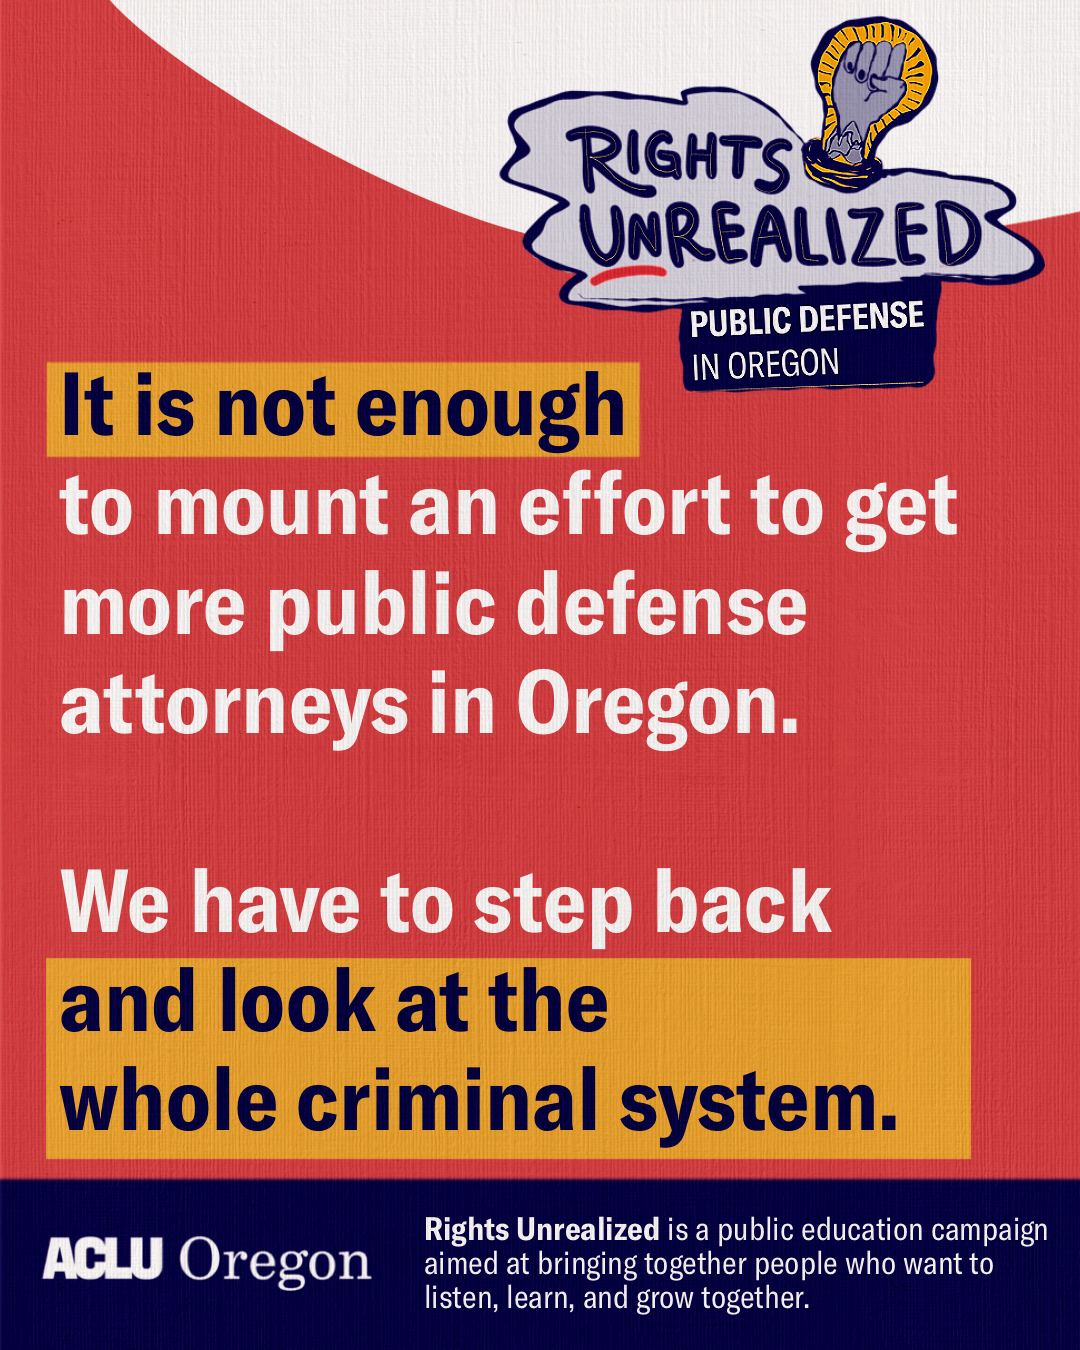 It is not enough to mount an effort to get more public defense attorneys in Oregon. We have to step back and look at the whole criminal system.